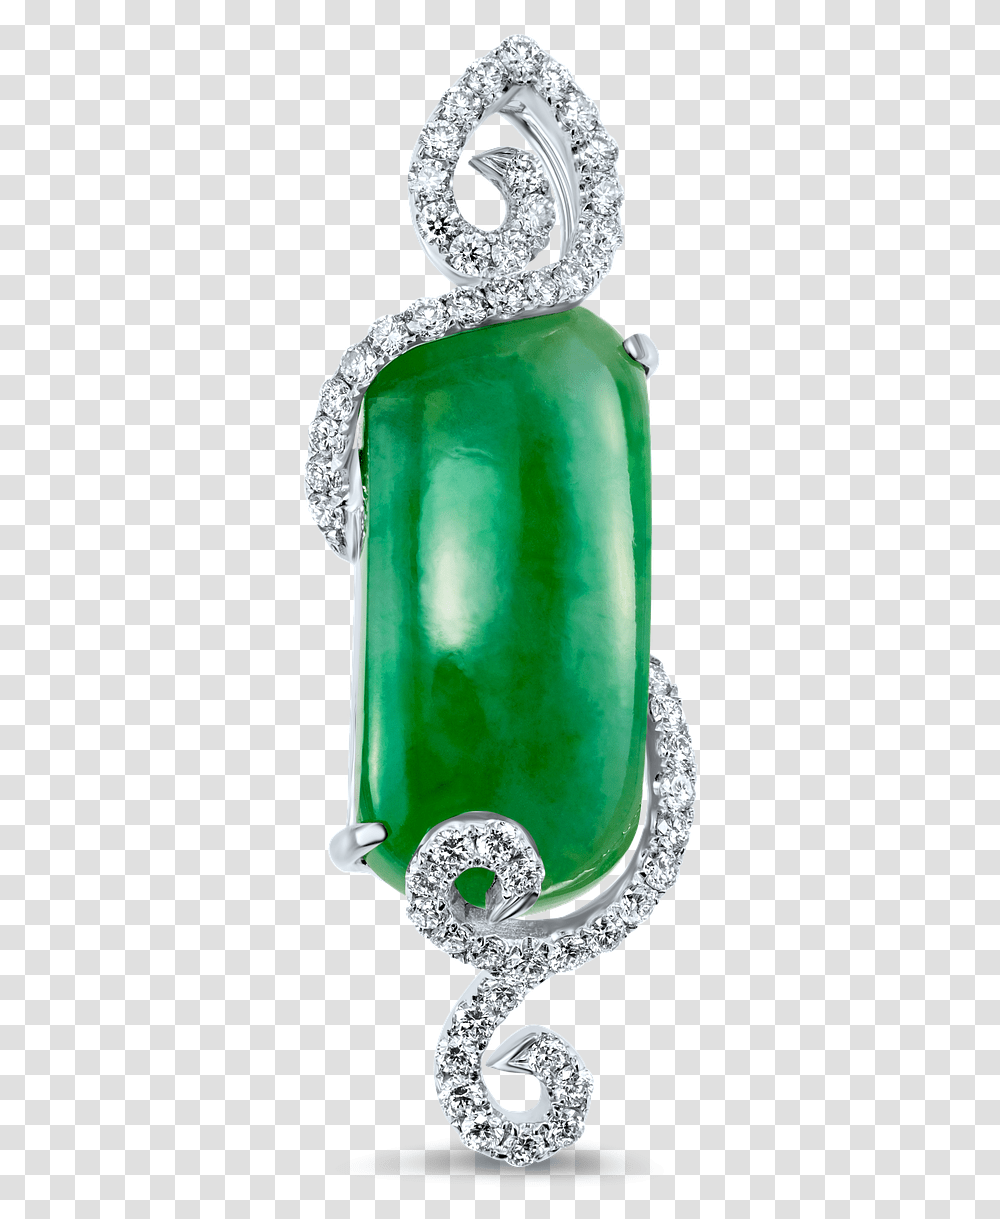 Jade Jewelry, Gemstone, Accessories, Accessory, Ornament Transparent Png